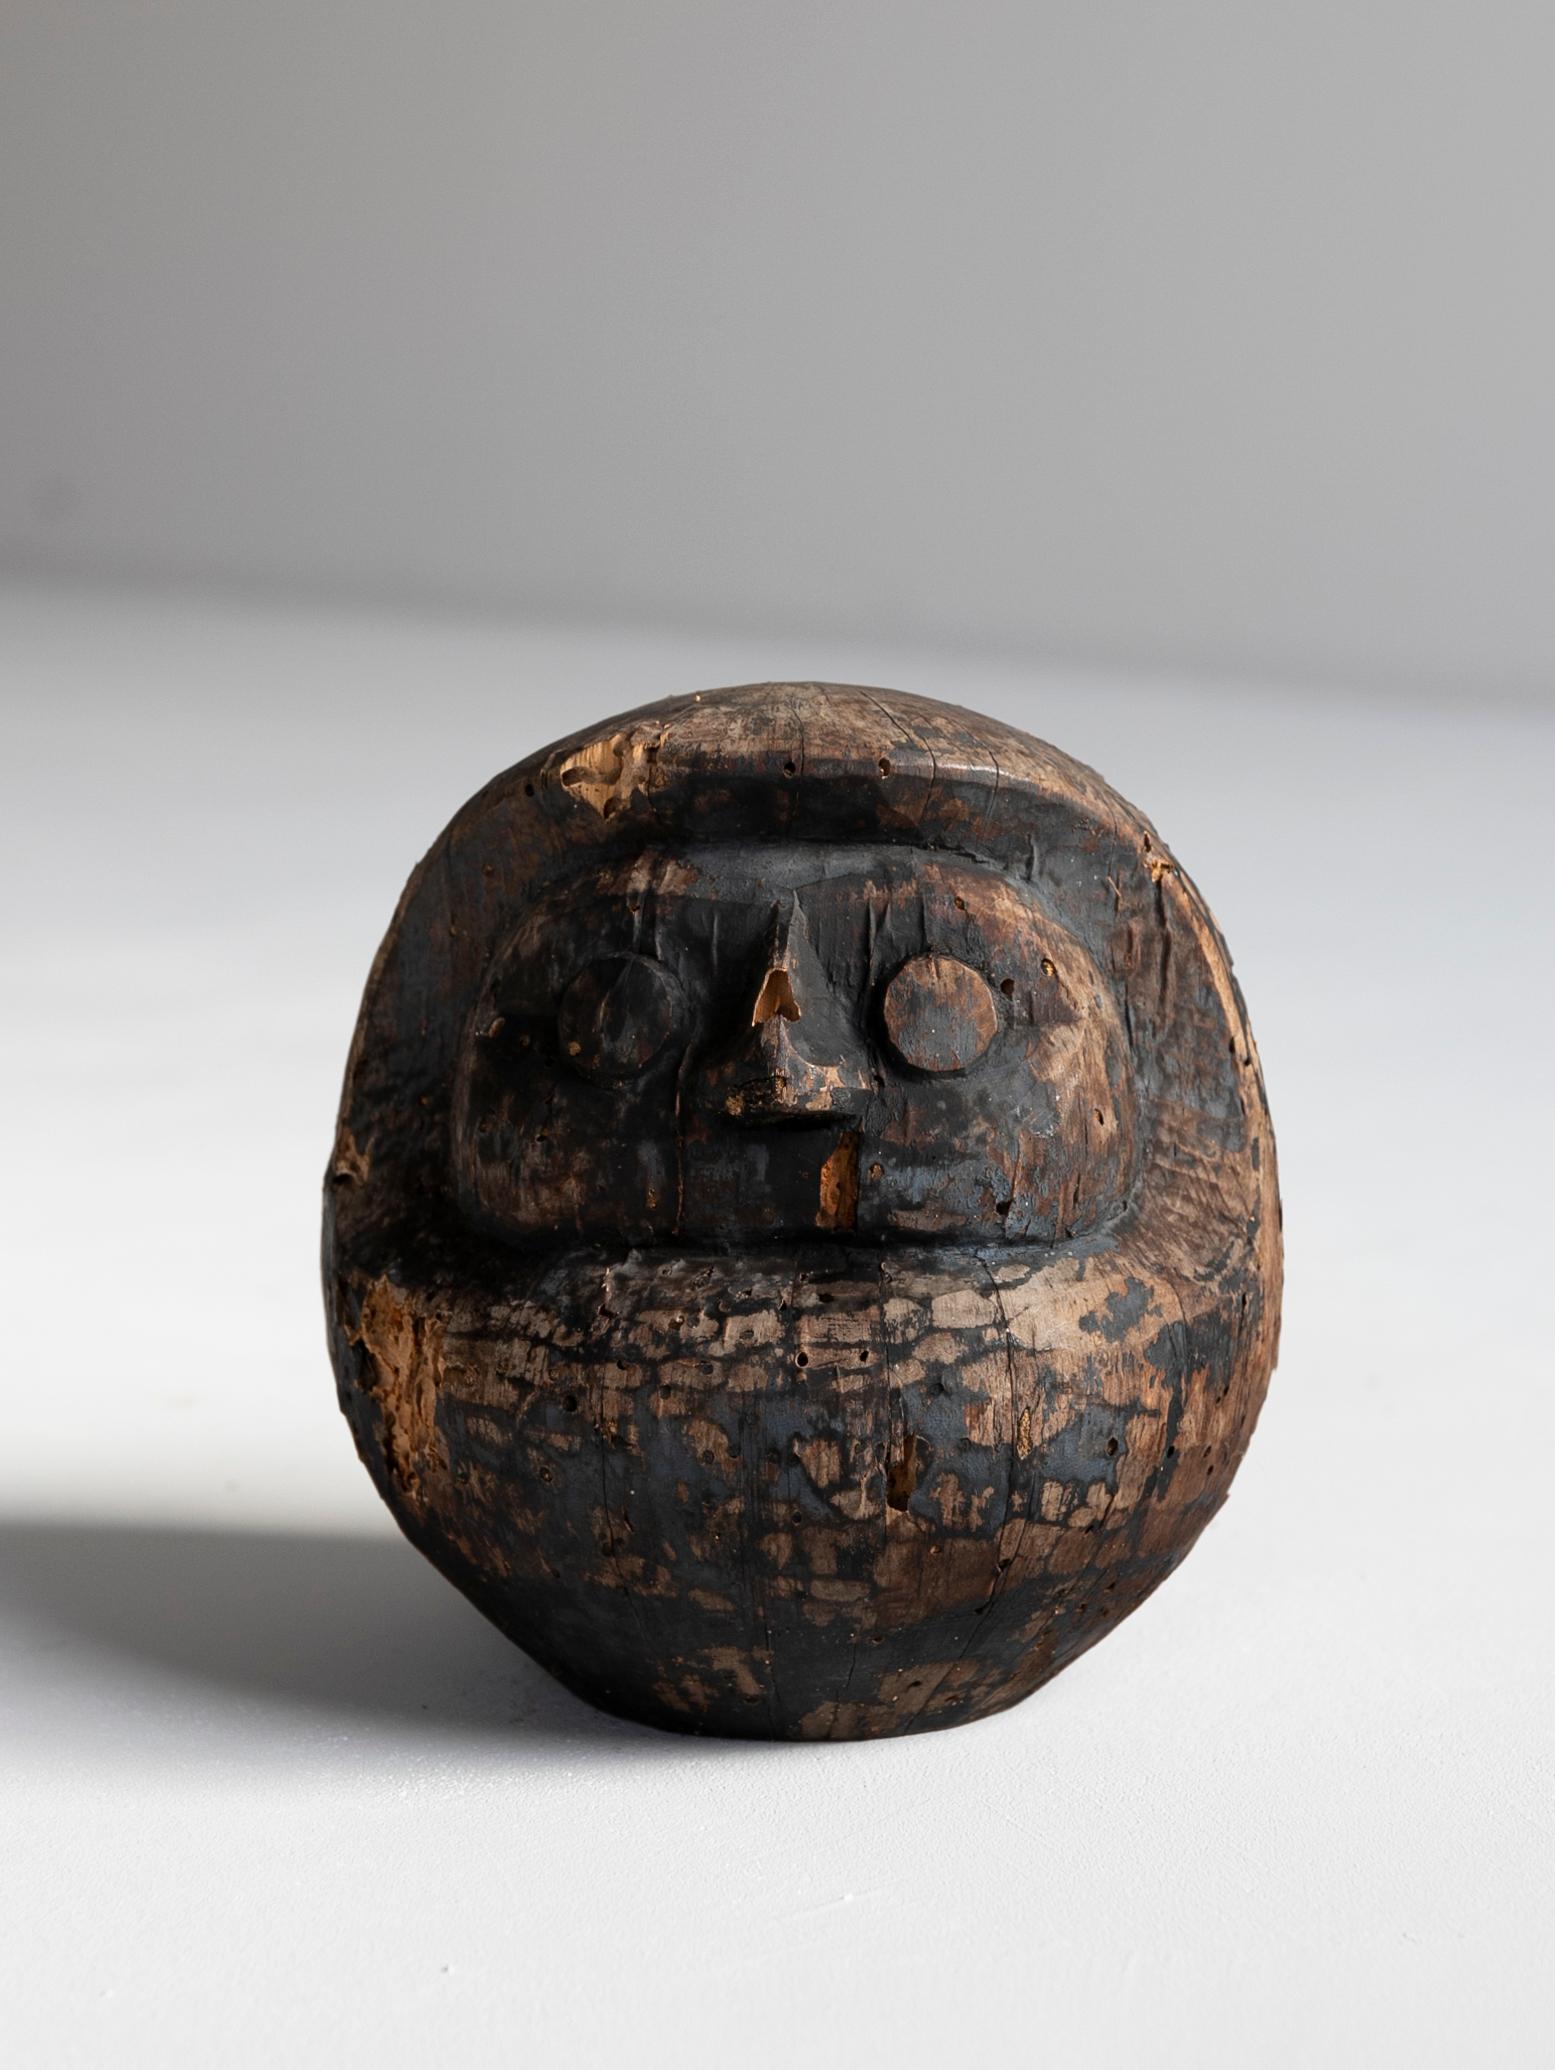 This is an old Japanese wooden daruma (wooden mold).
It is from the Meiji era (1860s-1920s).
It seems to be made of paulownia wood.

It is a precious wooden Daruma mold.

In those days, many daruma dolls were produced using this wooden mold by a